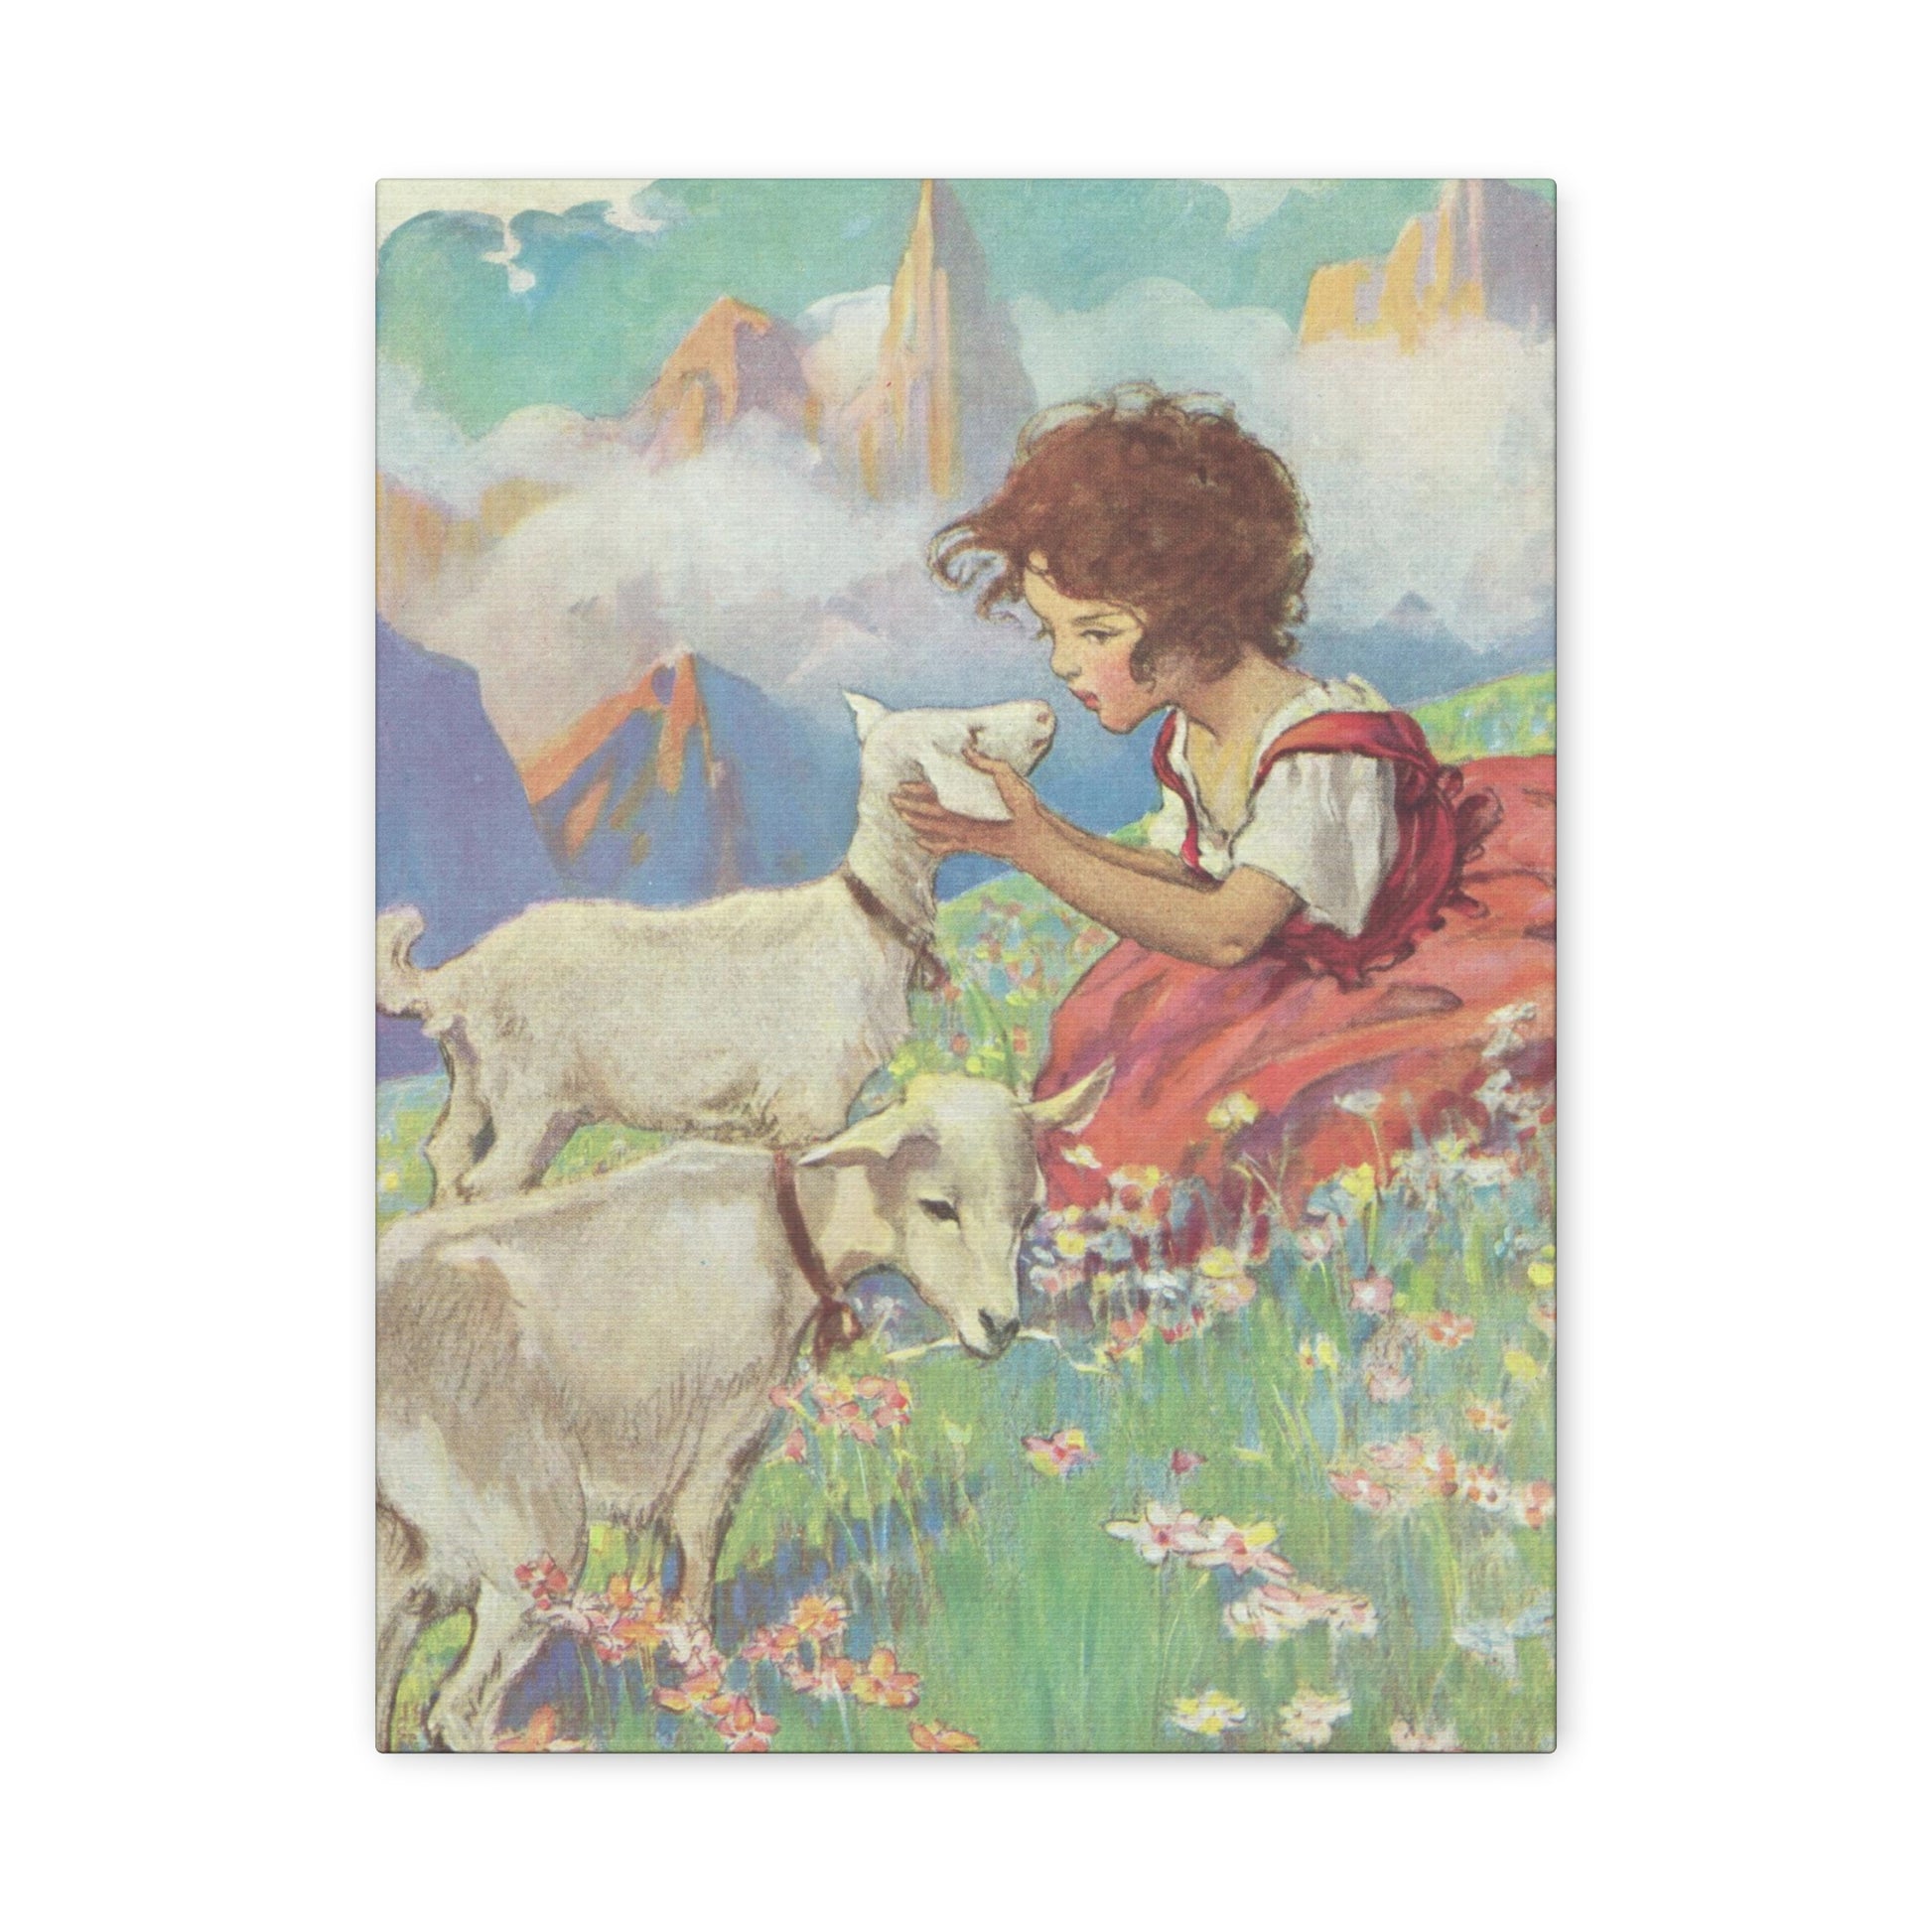 Vintage 1904 "Heidi and Friends" Canvas Print, Pastoral Alpine Scene with Child and Goats-CropsyPix